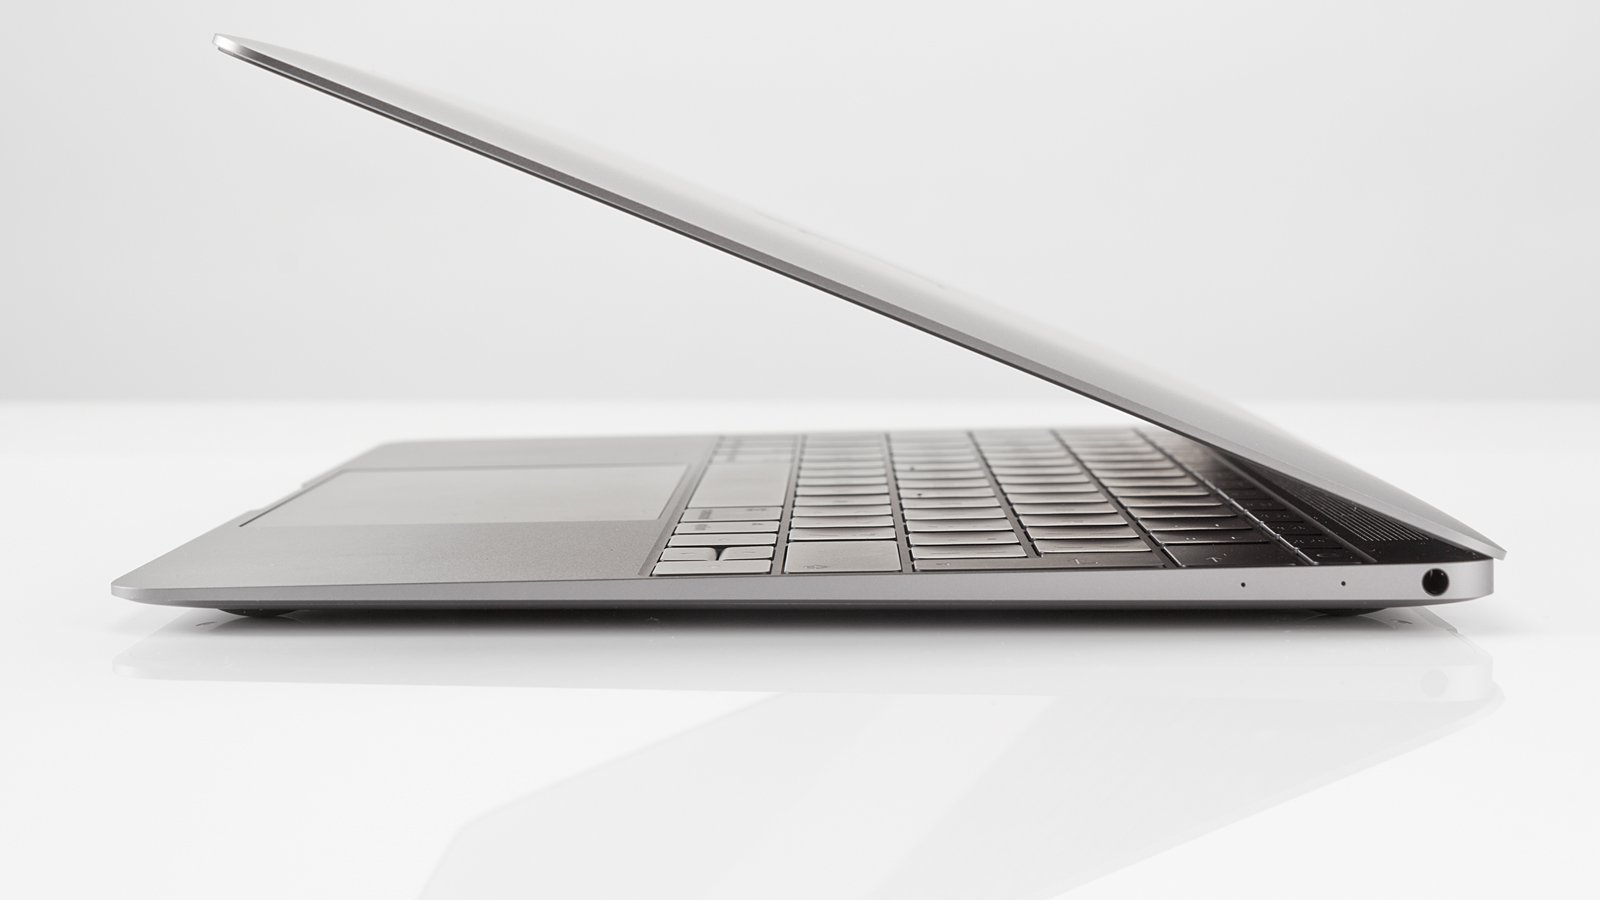 A 13 inch successor to the 12 inch MacBook Retina could replace the